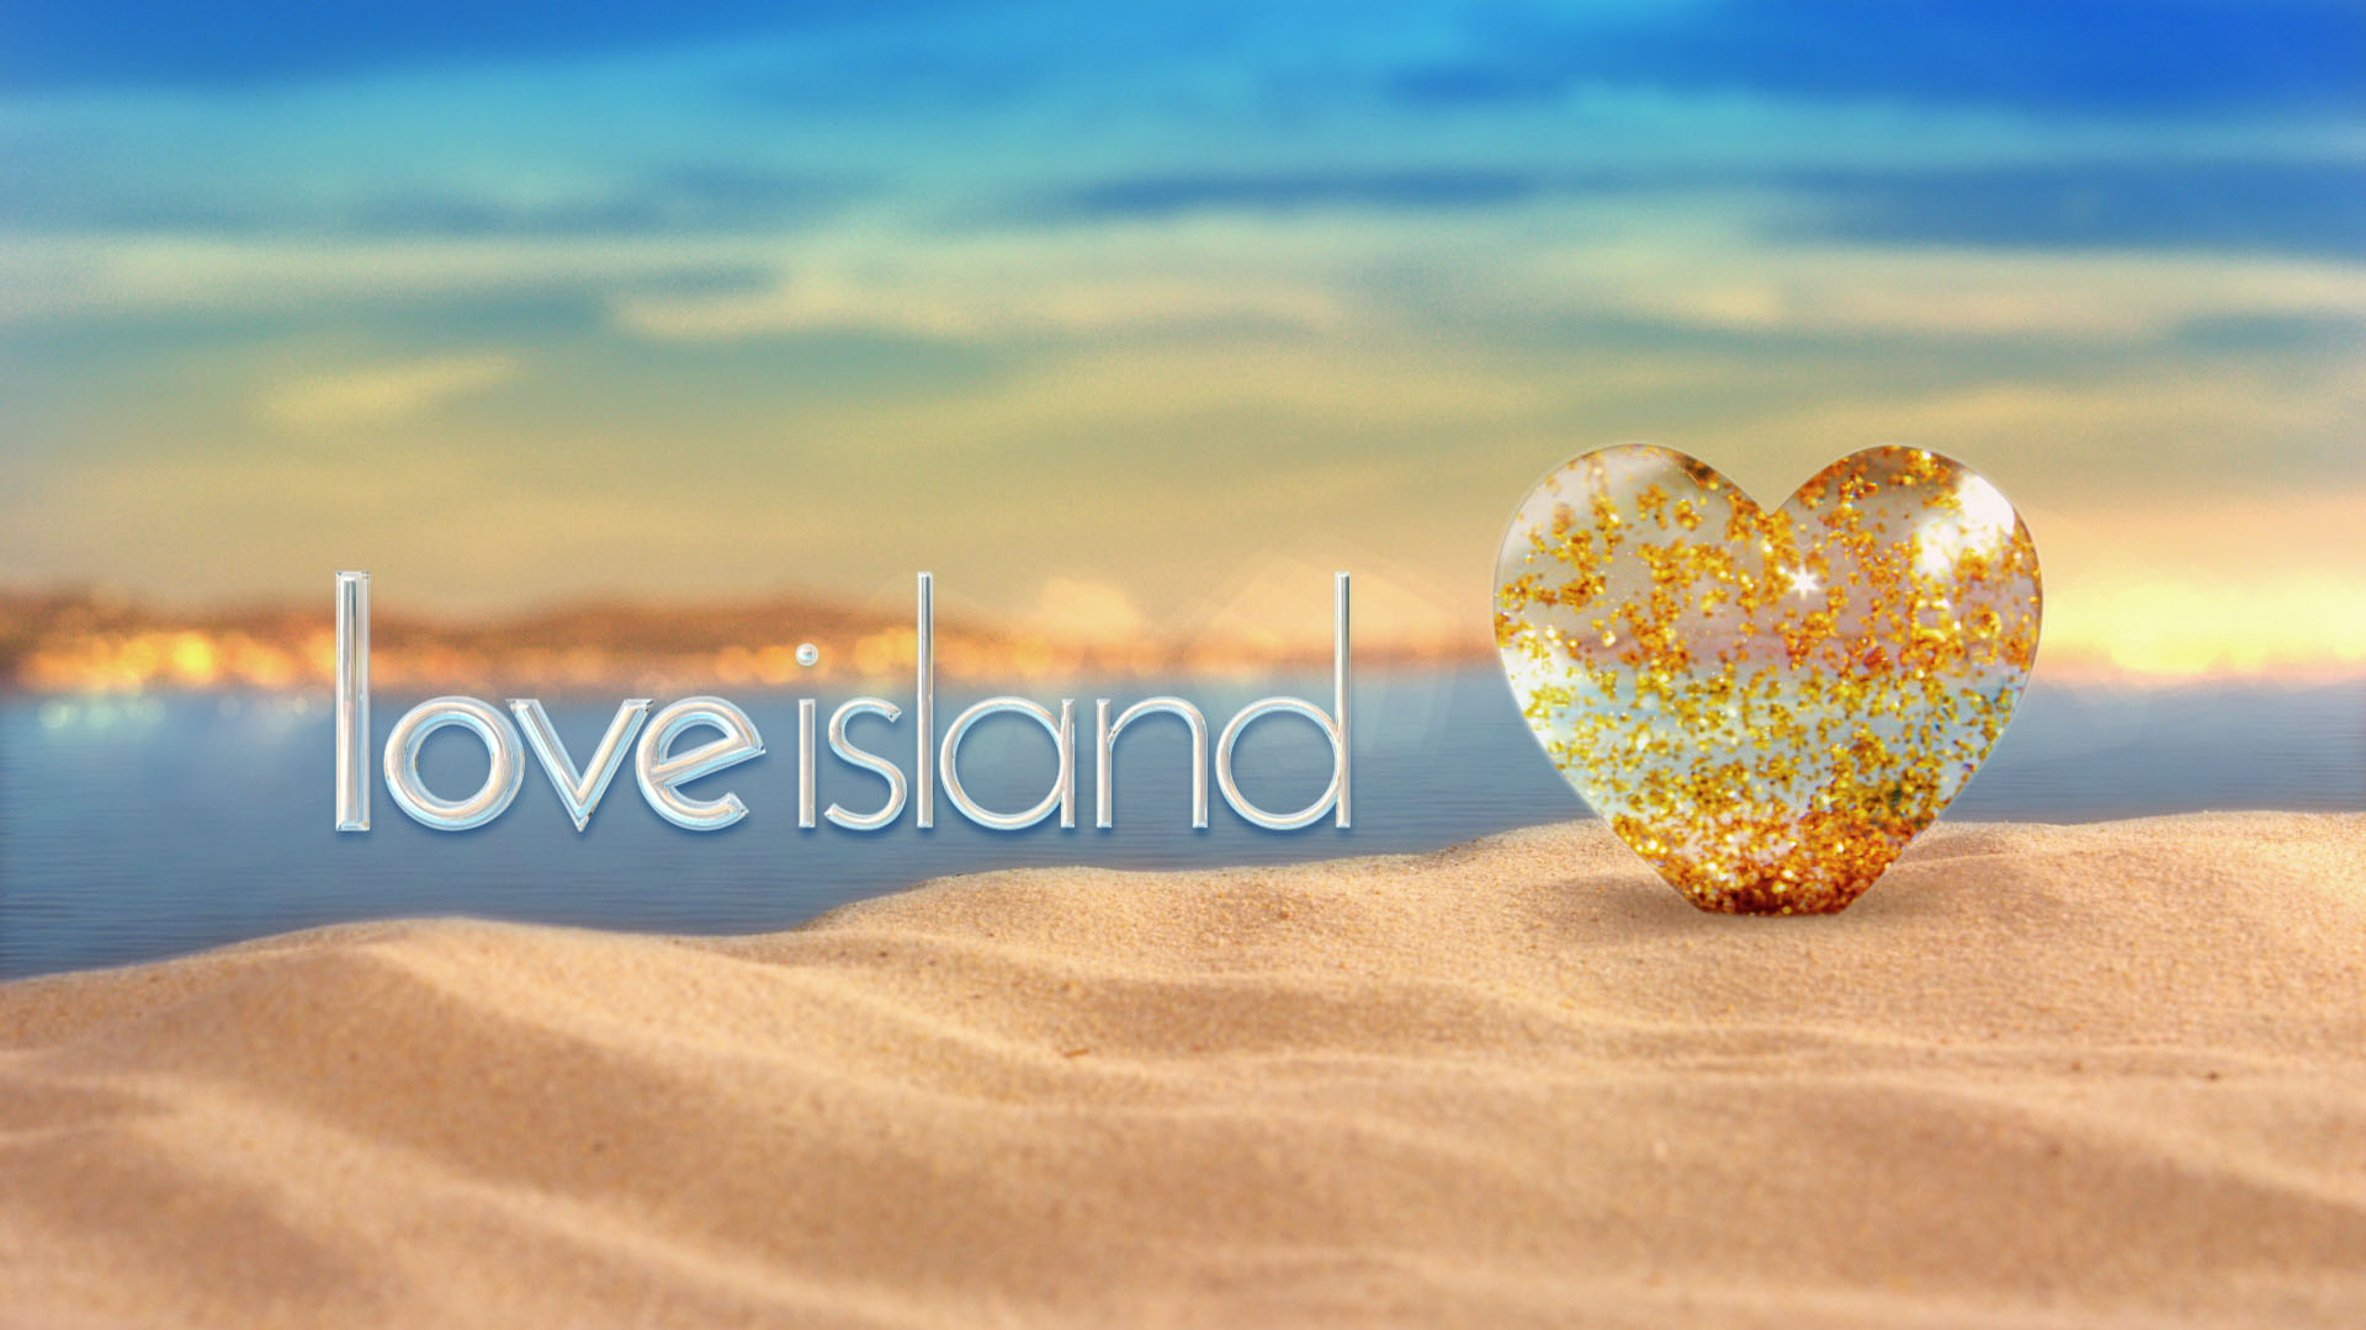 Love Island is Casting!